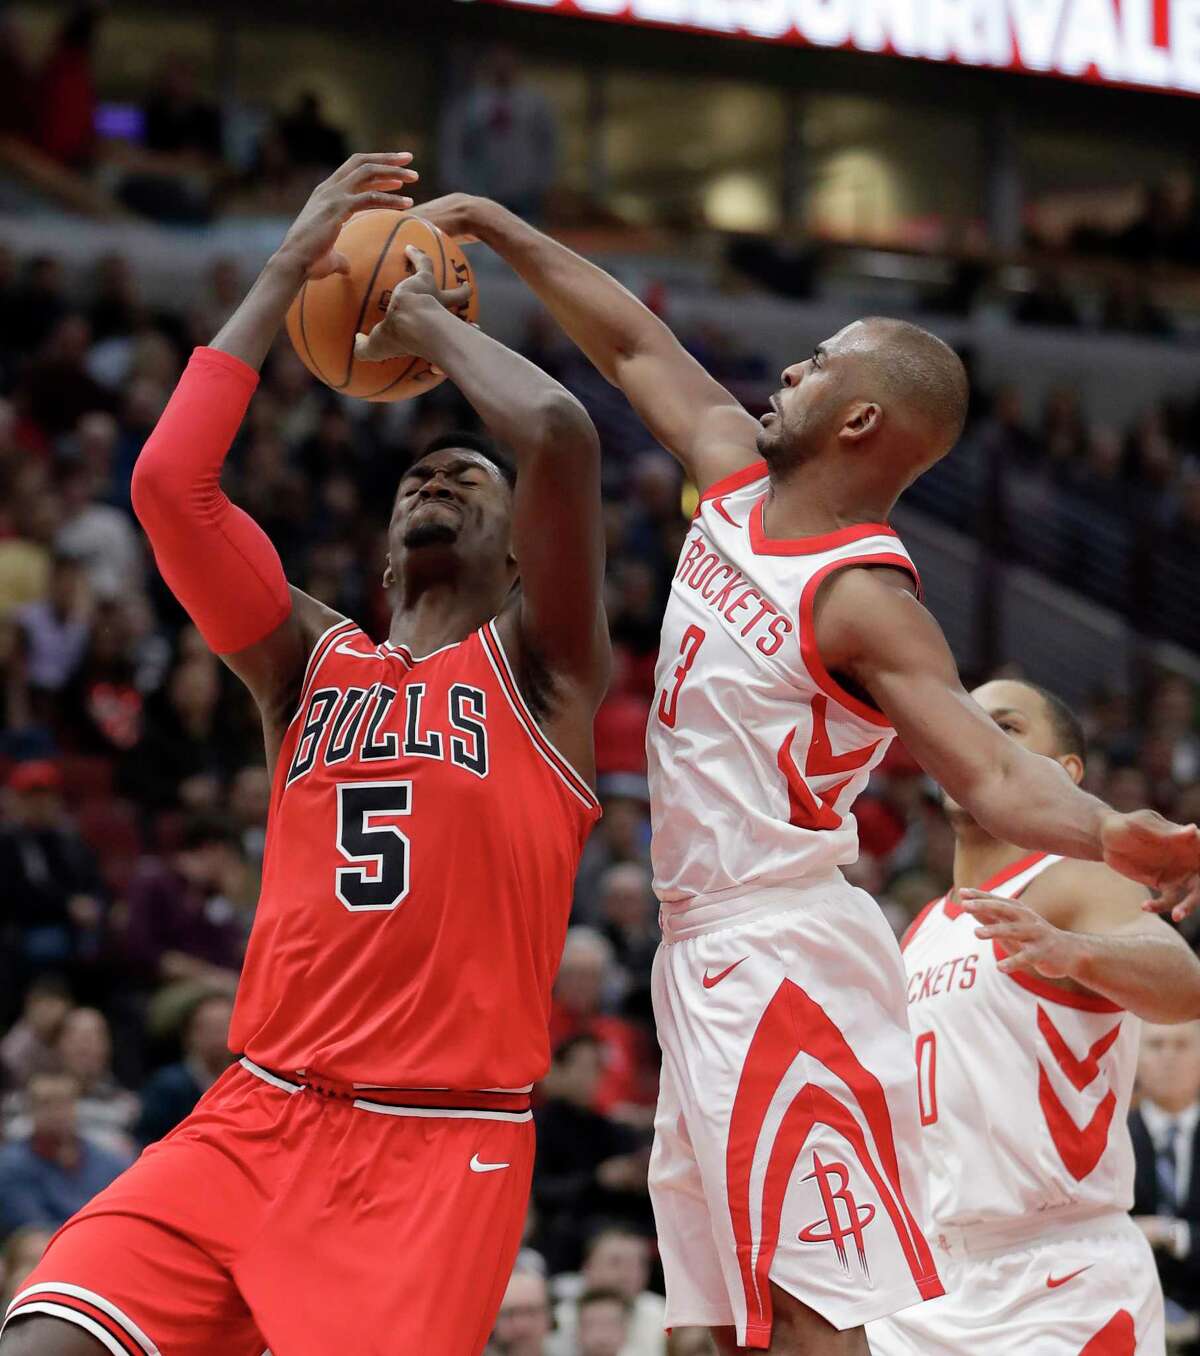 Houston Rockets' Chris Paul, front right, blocks the shot of Chicago Bulls' Bobby Portis, left, during the second half of an NBA basketball game Monday, Jan. 8, 2018, in Chicago. (AP Photo/Charles Rex Arbogast)